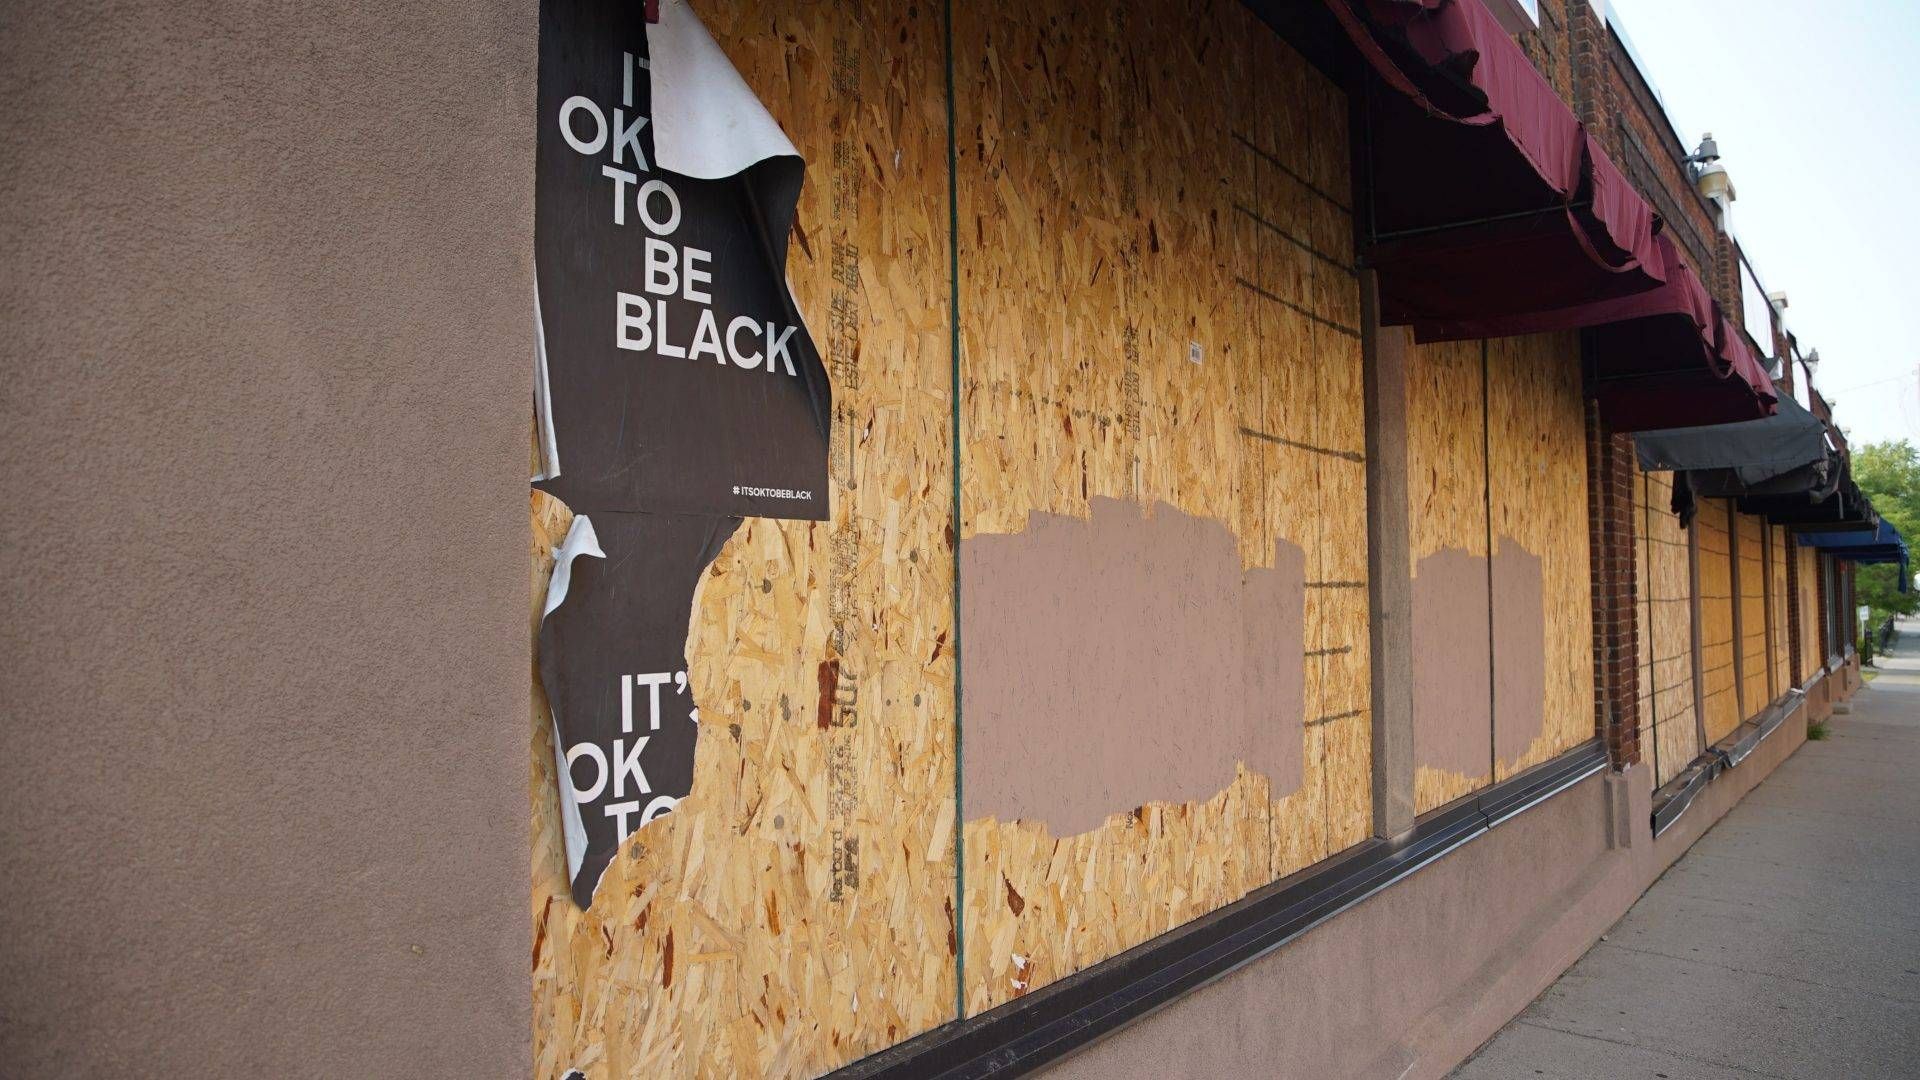 Ripped signs reading "It's OK to be Black" on plywood covering a Minneapolis building.